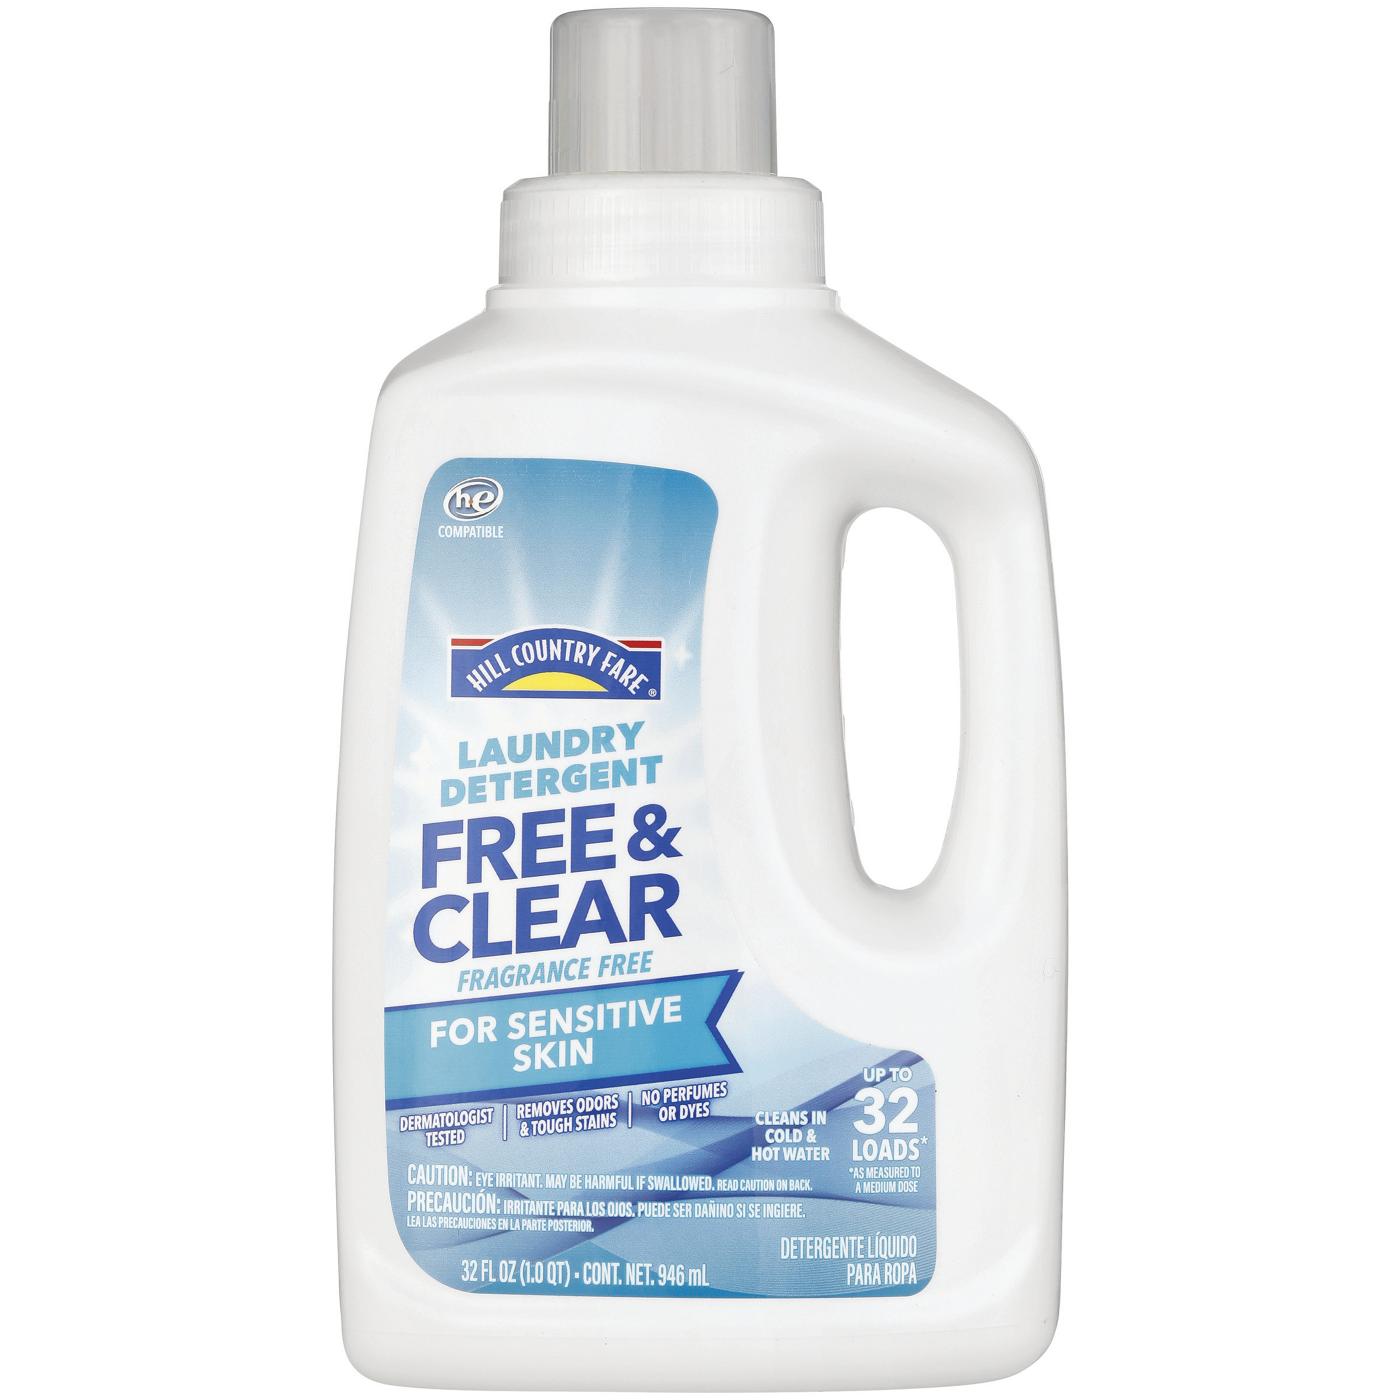 Hill Country Fare Free & Clear HE Liquid Laundry Detergent, 32 Loads - Fragrance-Free; image 1 of 2